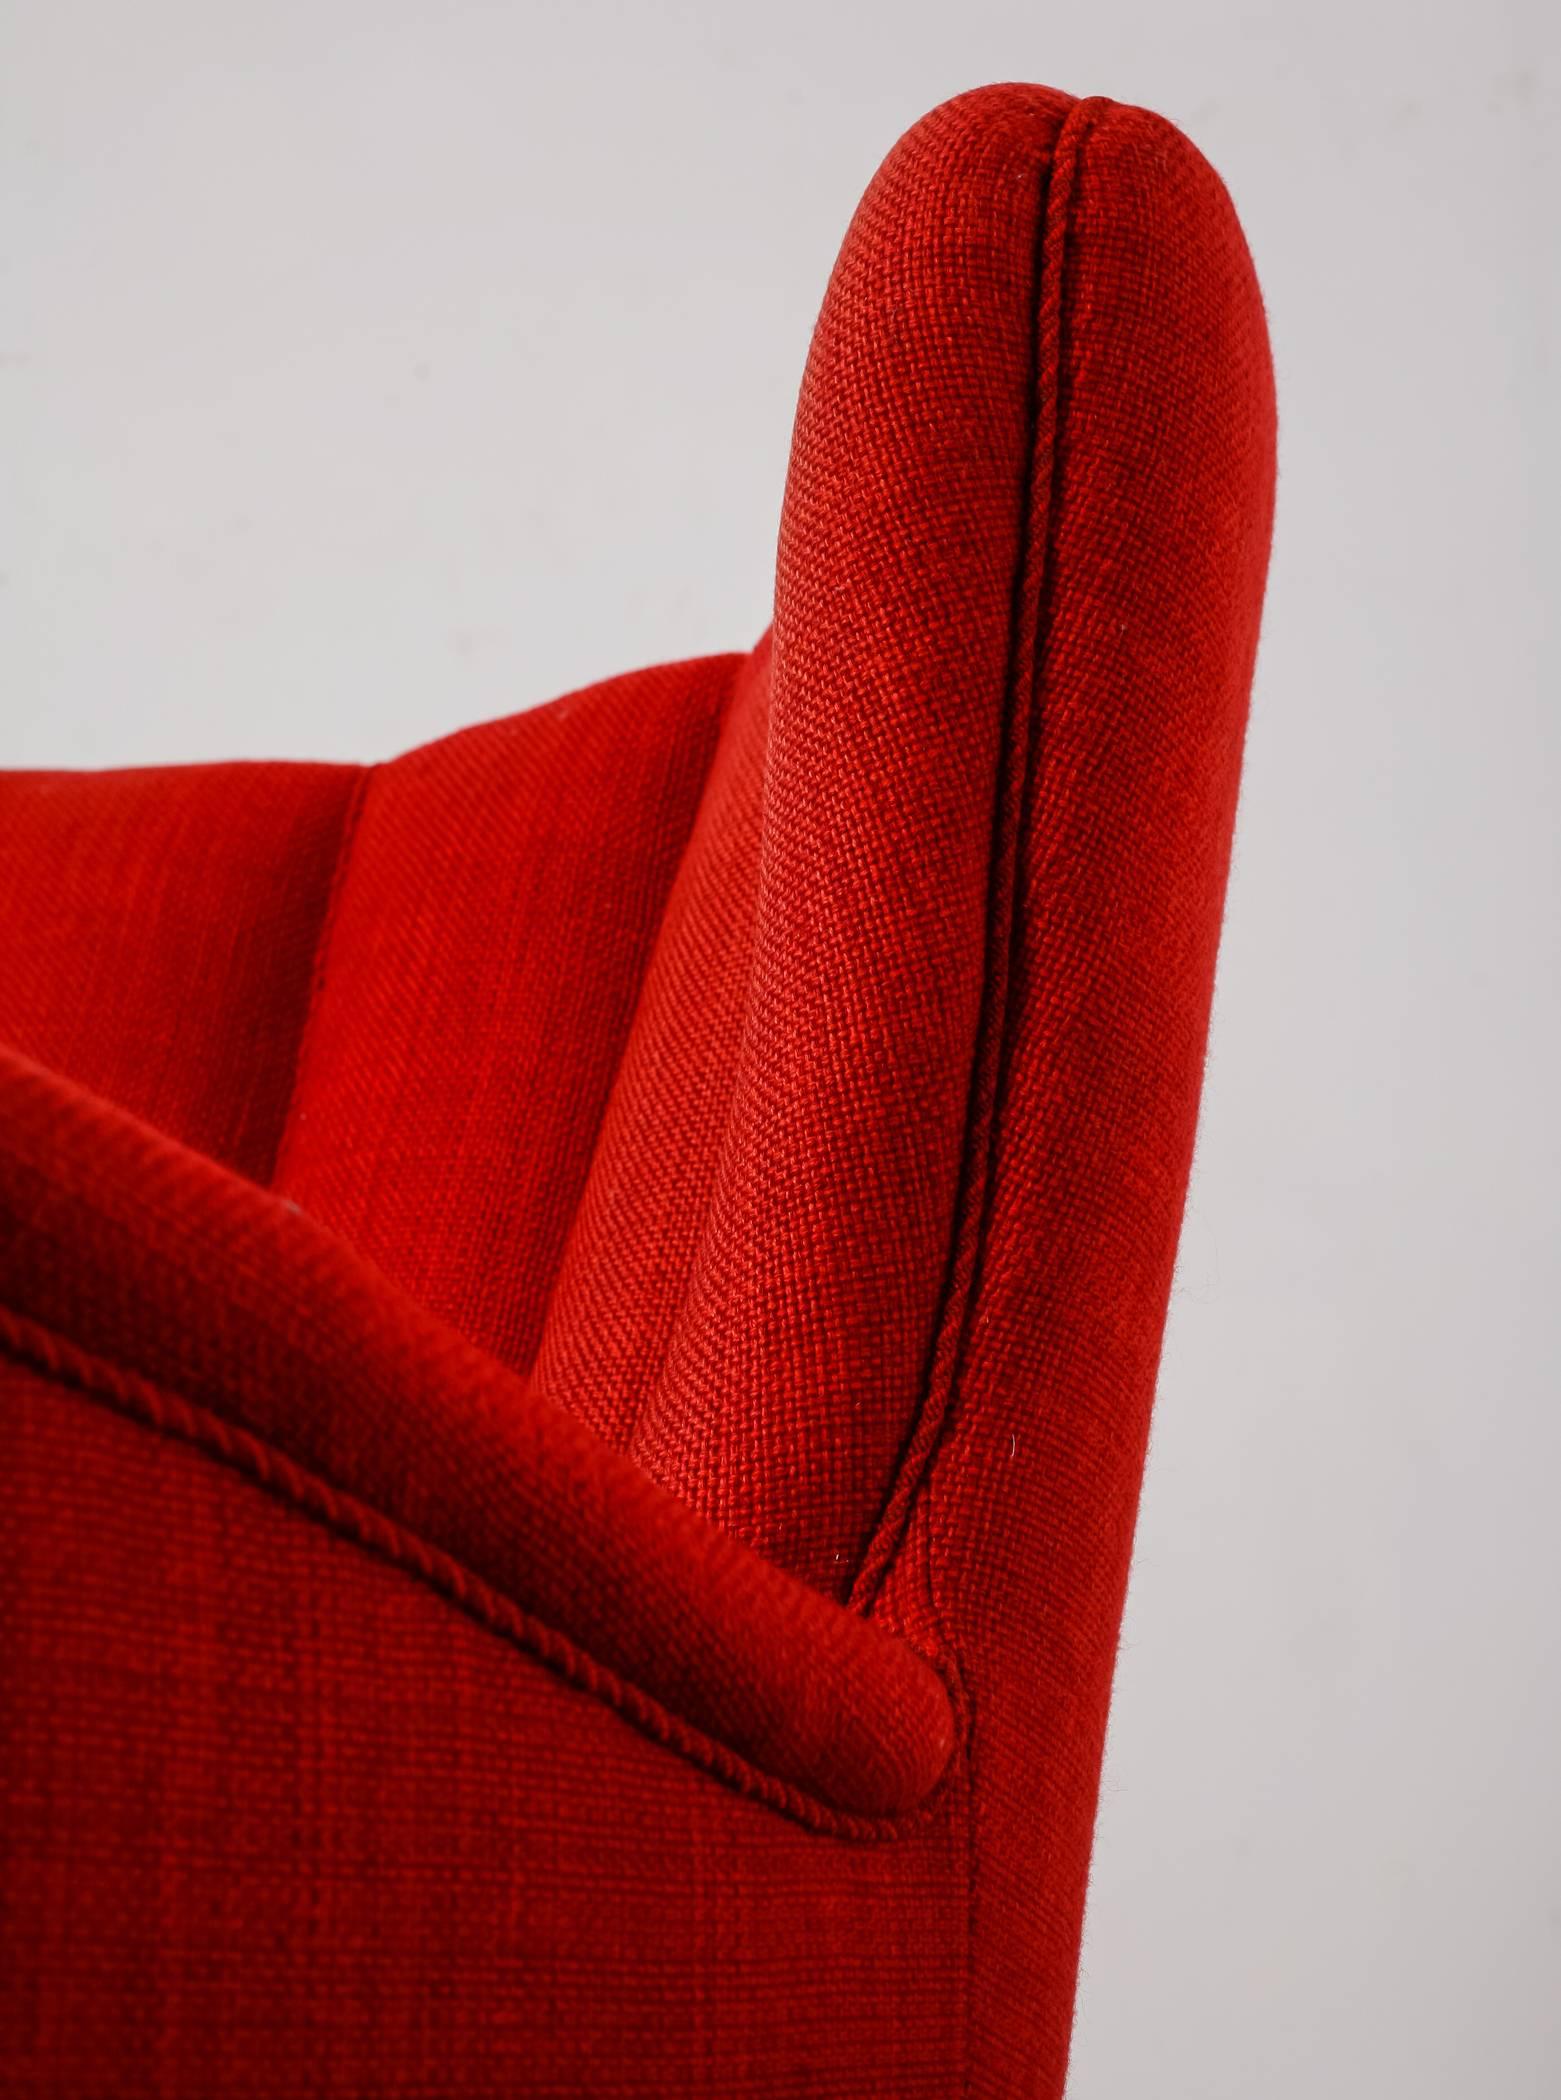 Mid-20th Century Danish Highback Easy Chair with Red Wool Upholstery, 1940s For Sale